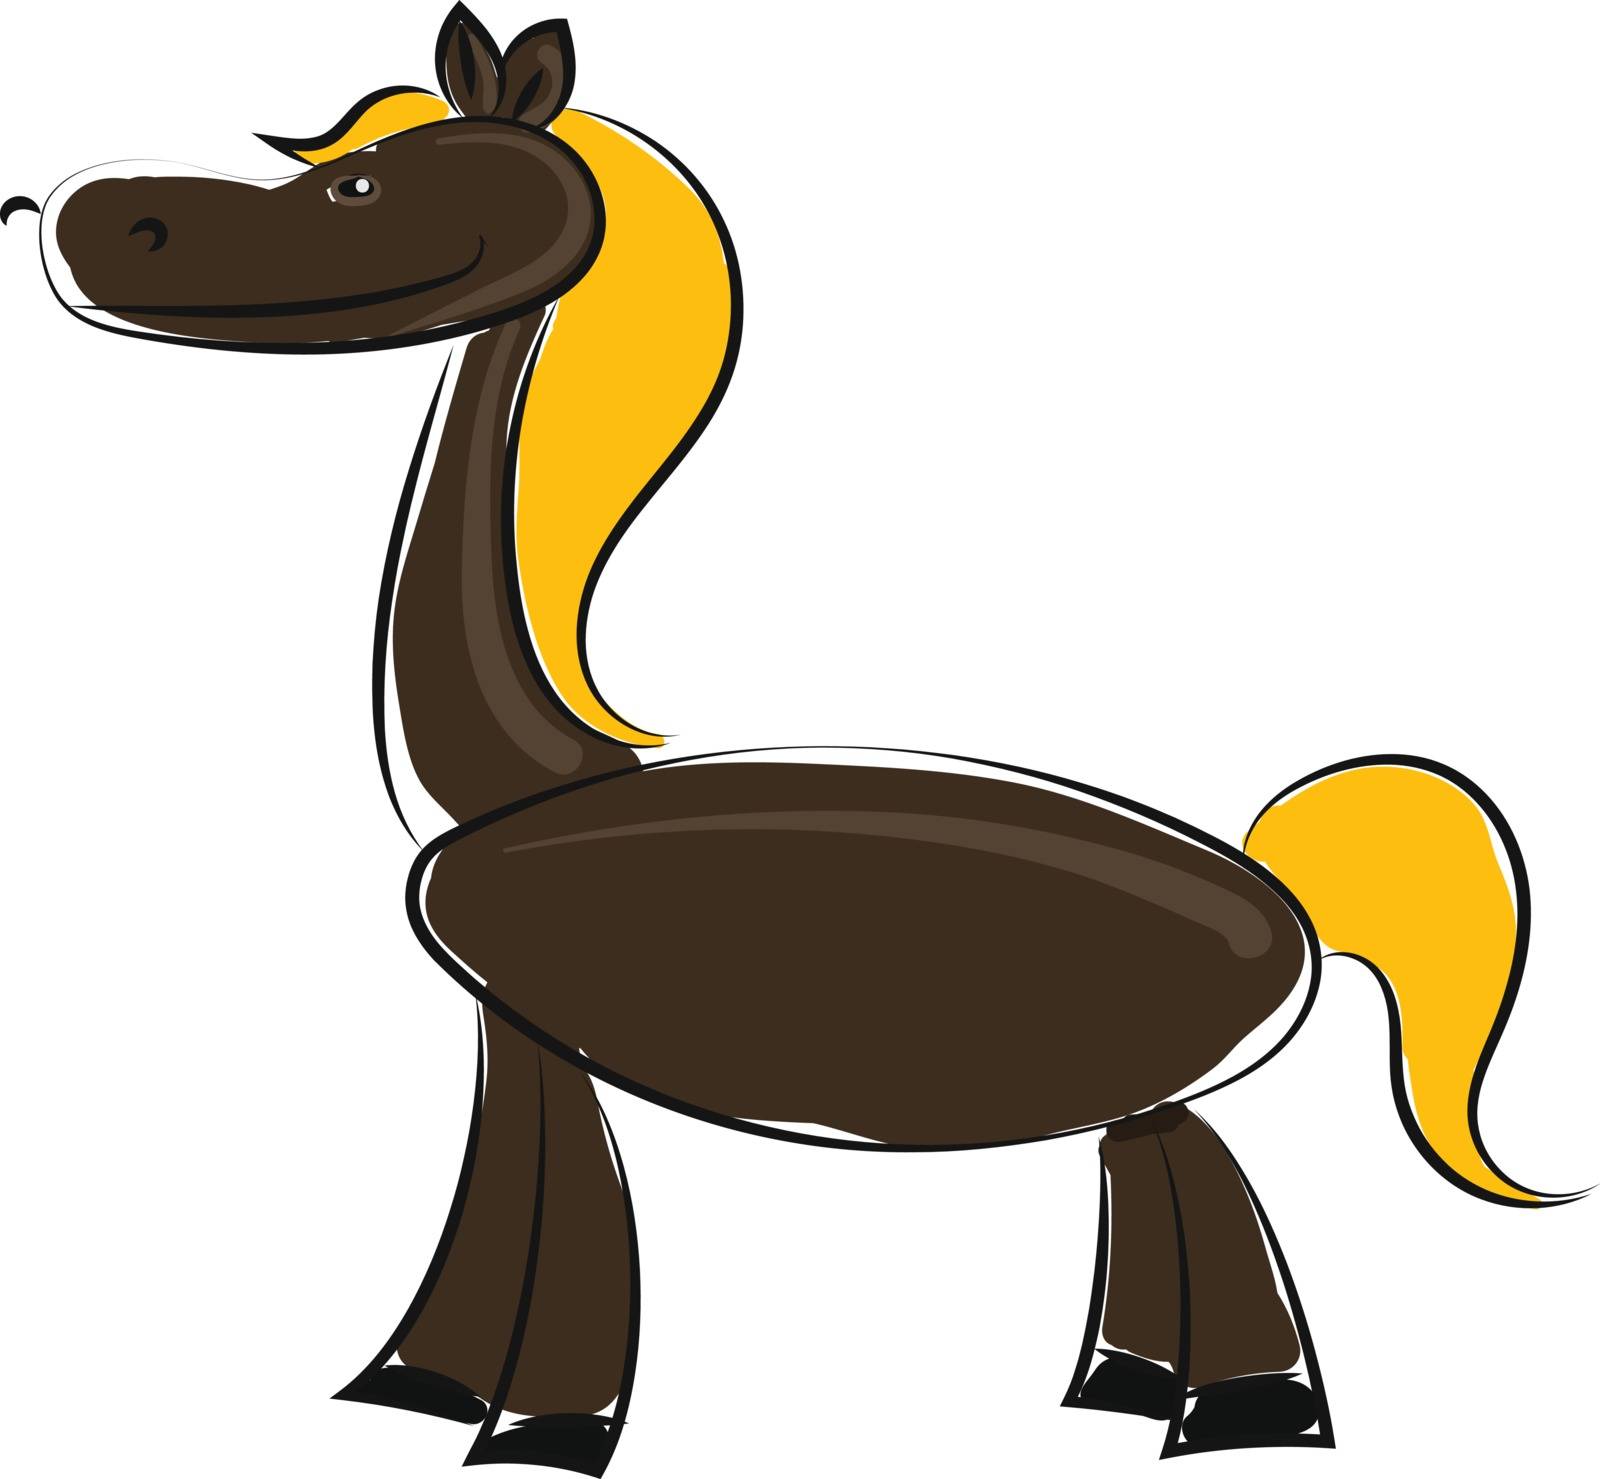 A dark brown horse with yellow hair and tail, vector, color drawing or illustration.